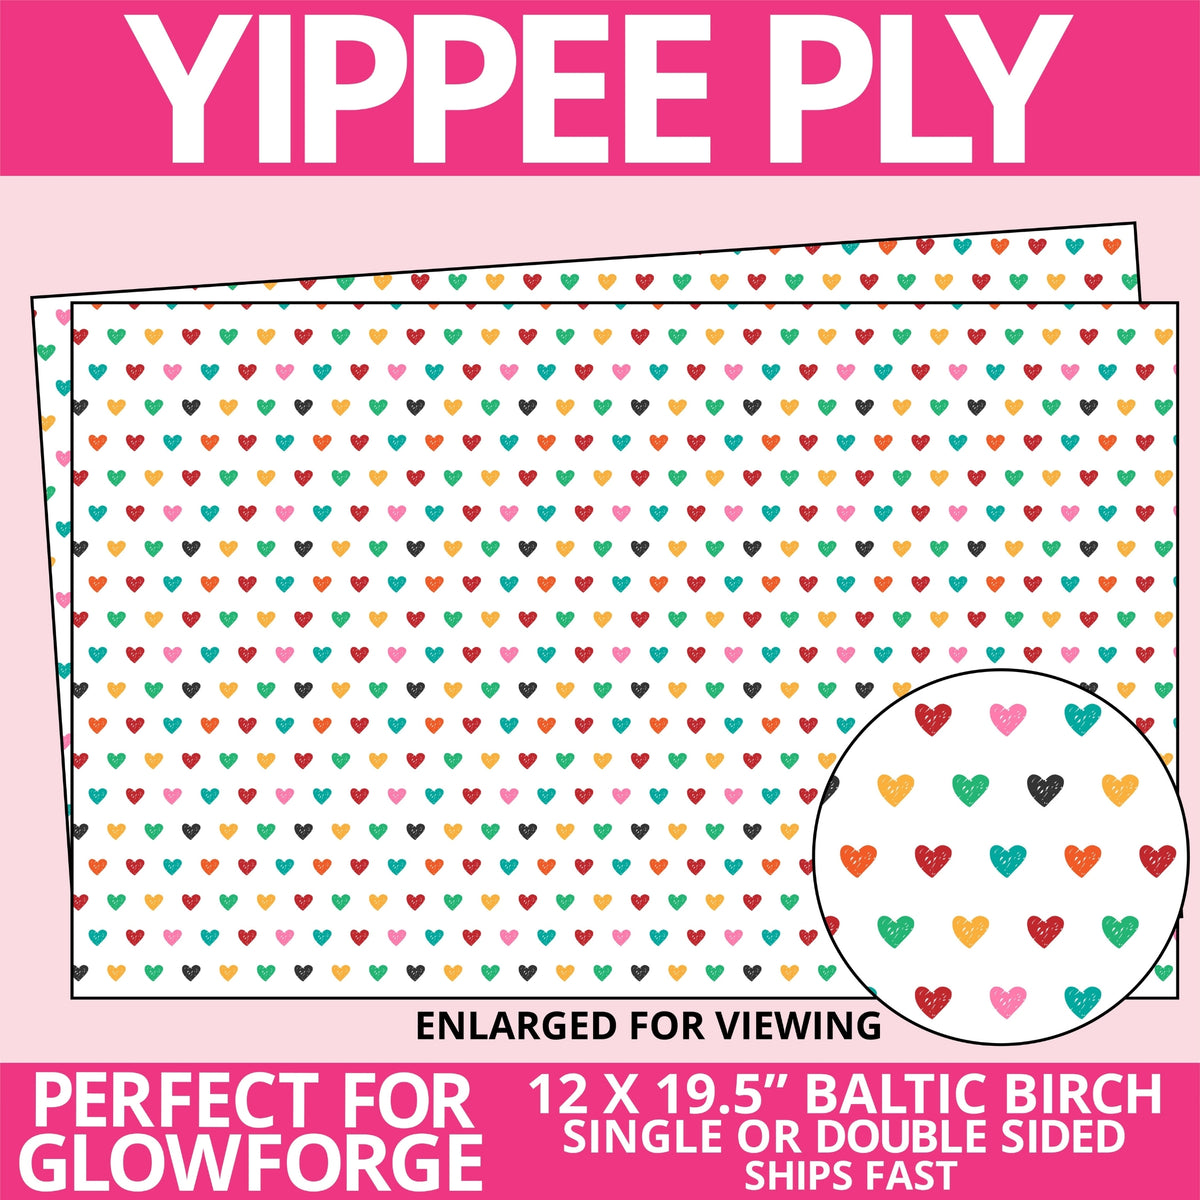 Yippee Ply Bright Heart Valentine Pattern on Birch Plywood